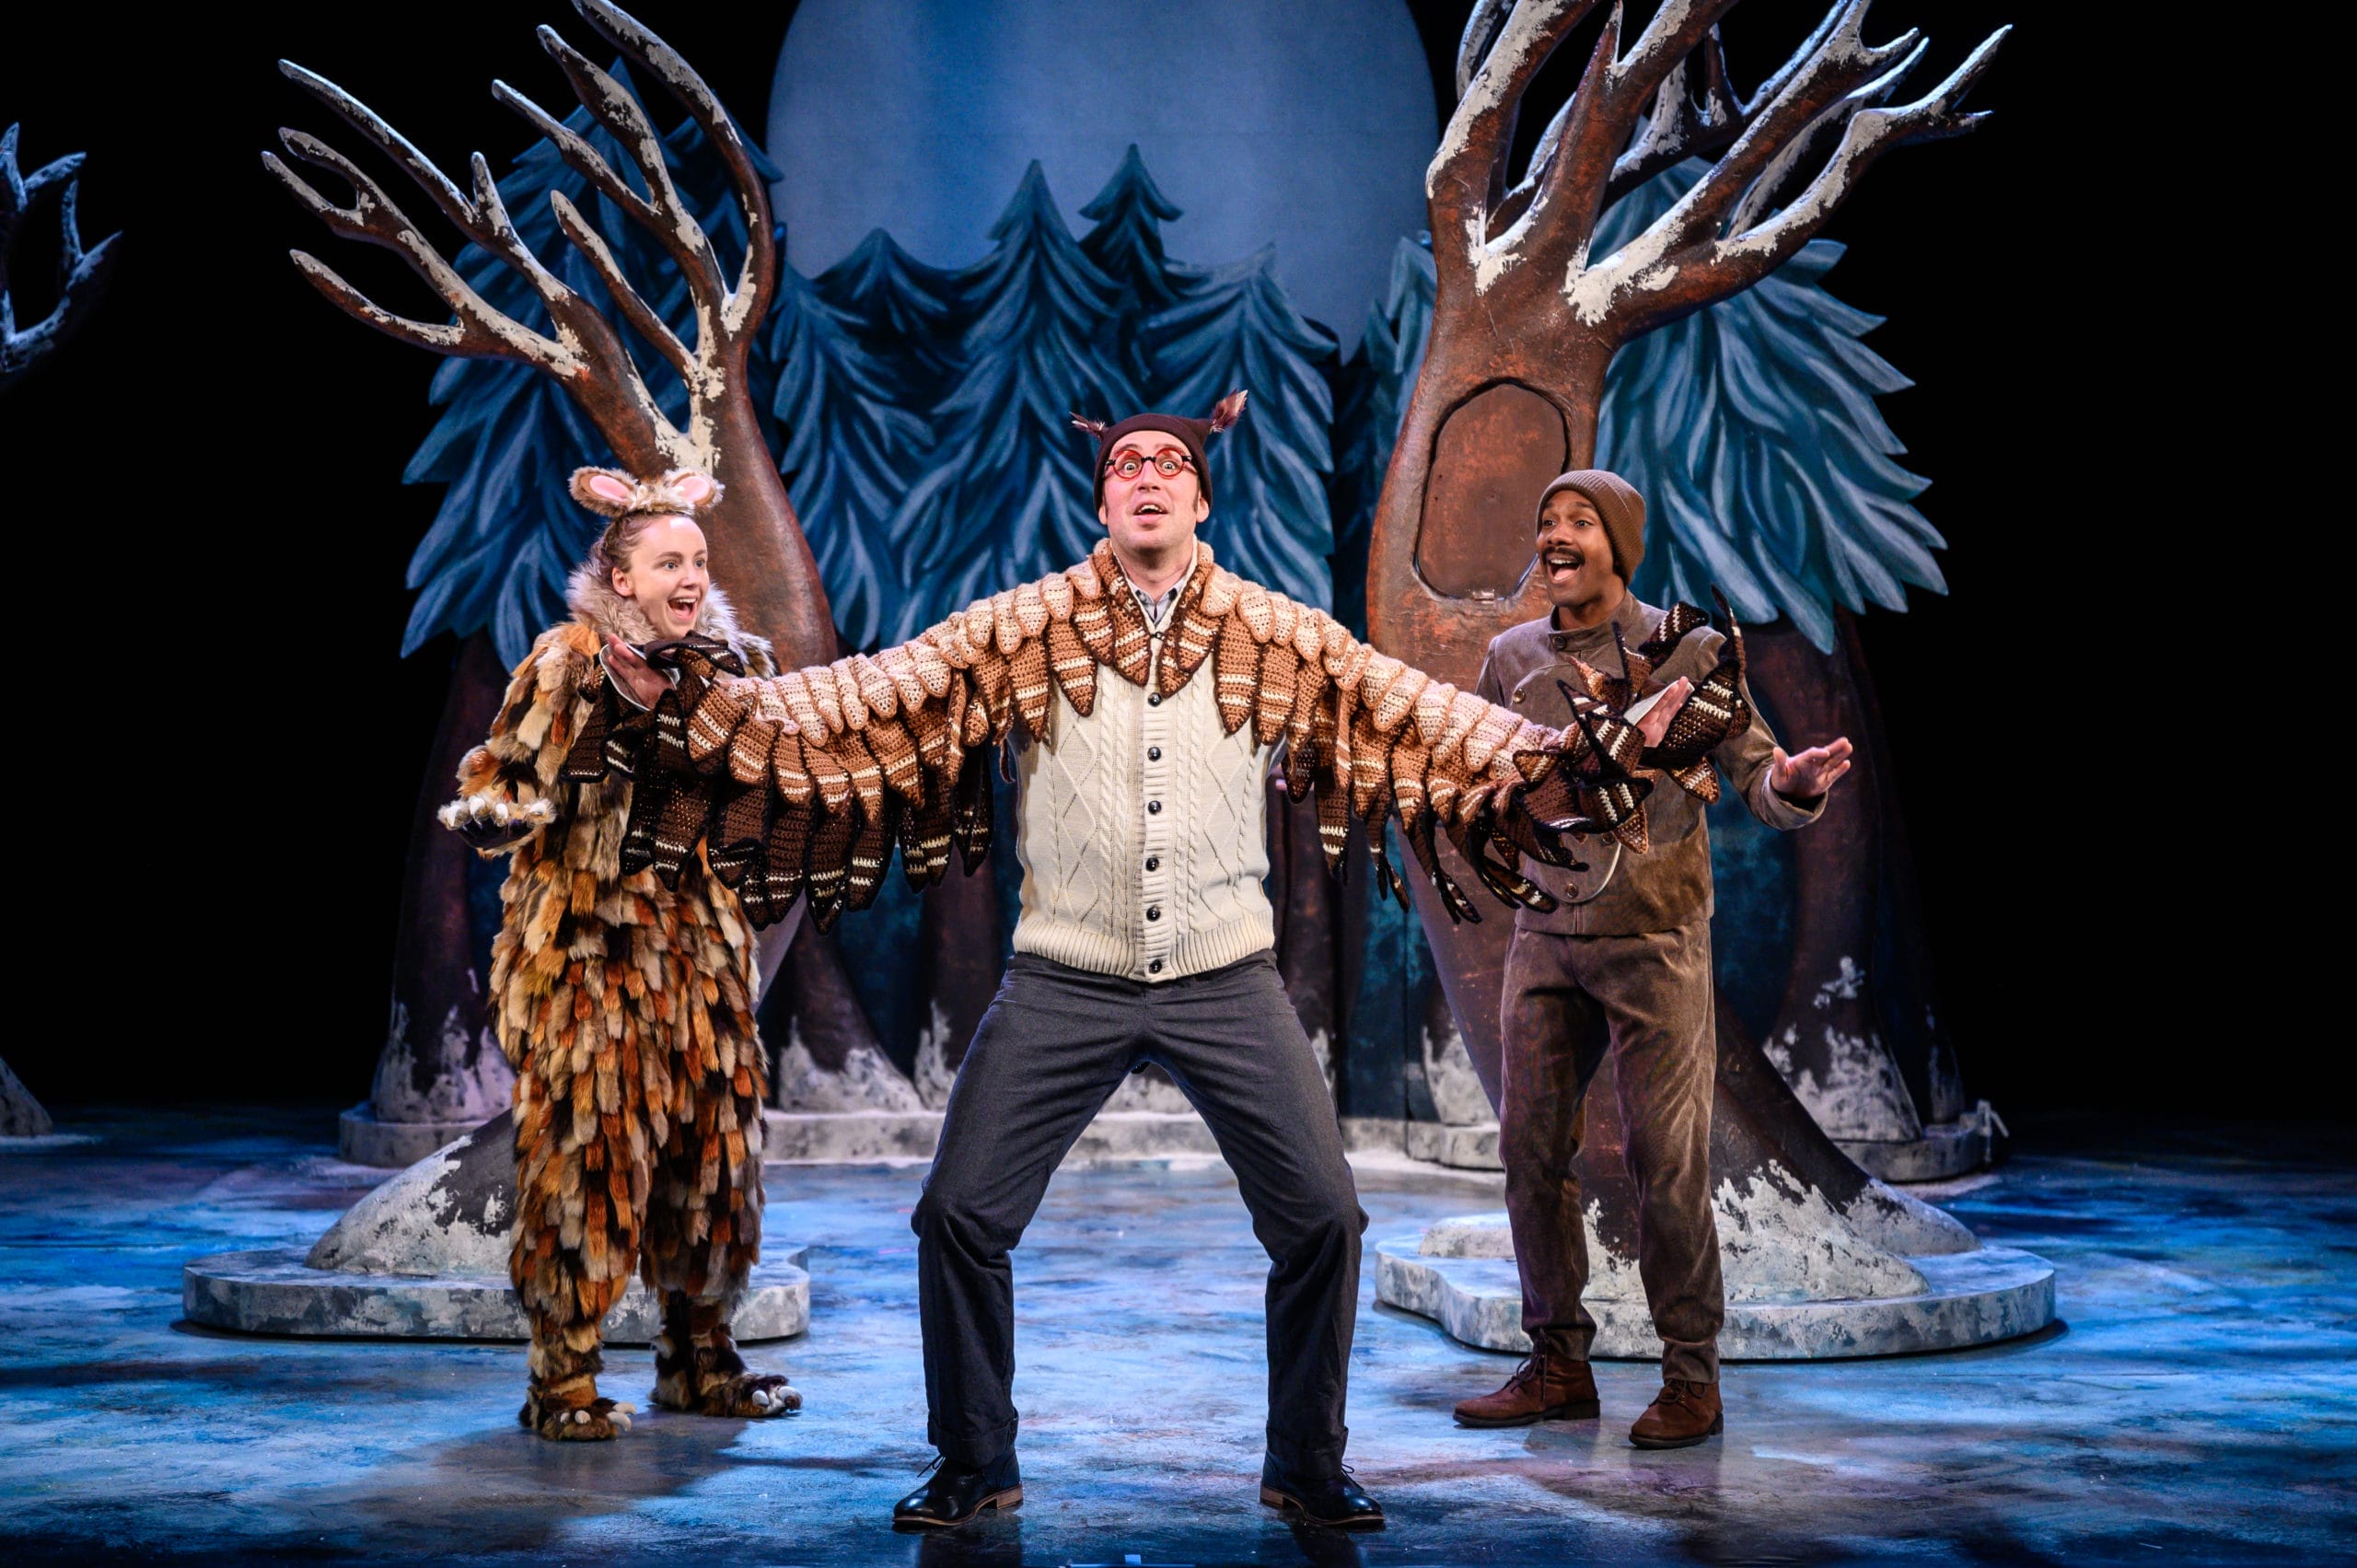 Production shot from The Gruffalo's Child artsdepot! The Gruffalo's Child, Owl and mouse stand together in a line, with Owl in the middle with glasses, outstretched wings, and a whimsical expression.